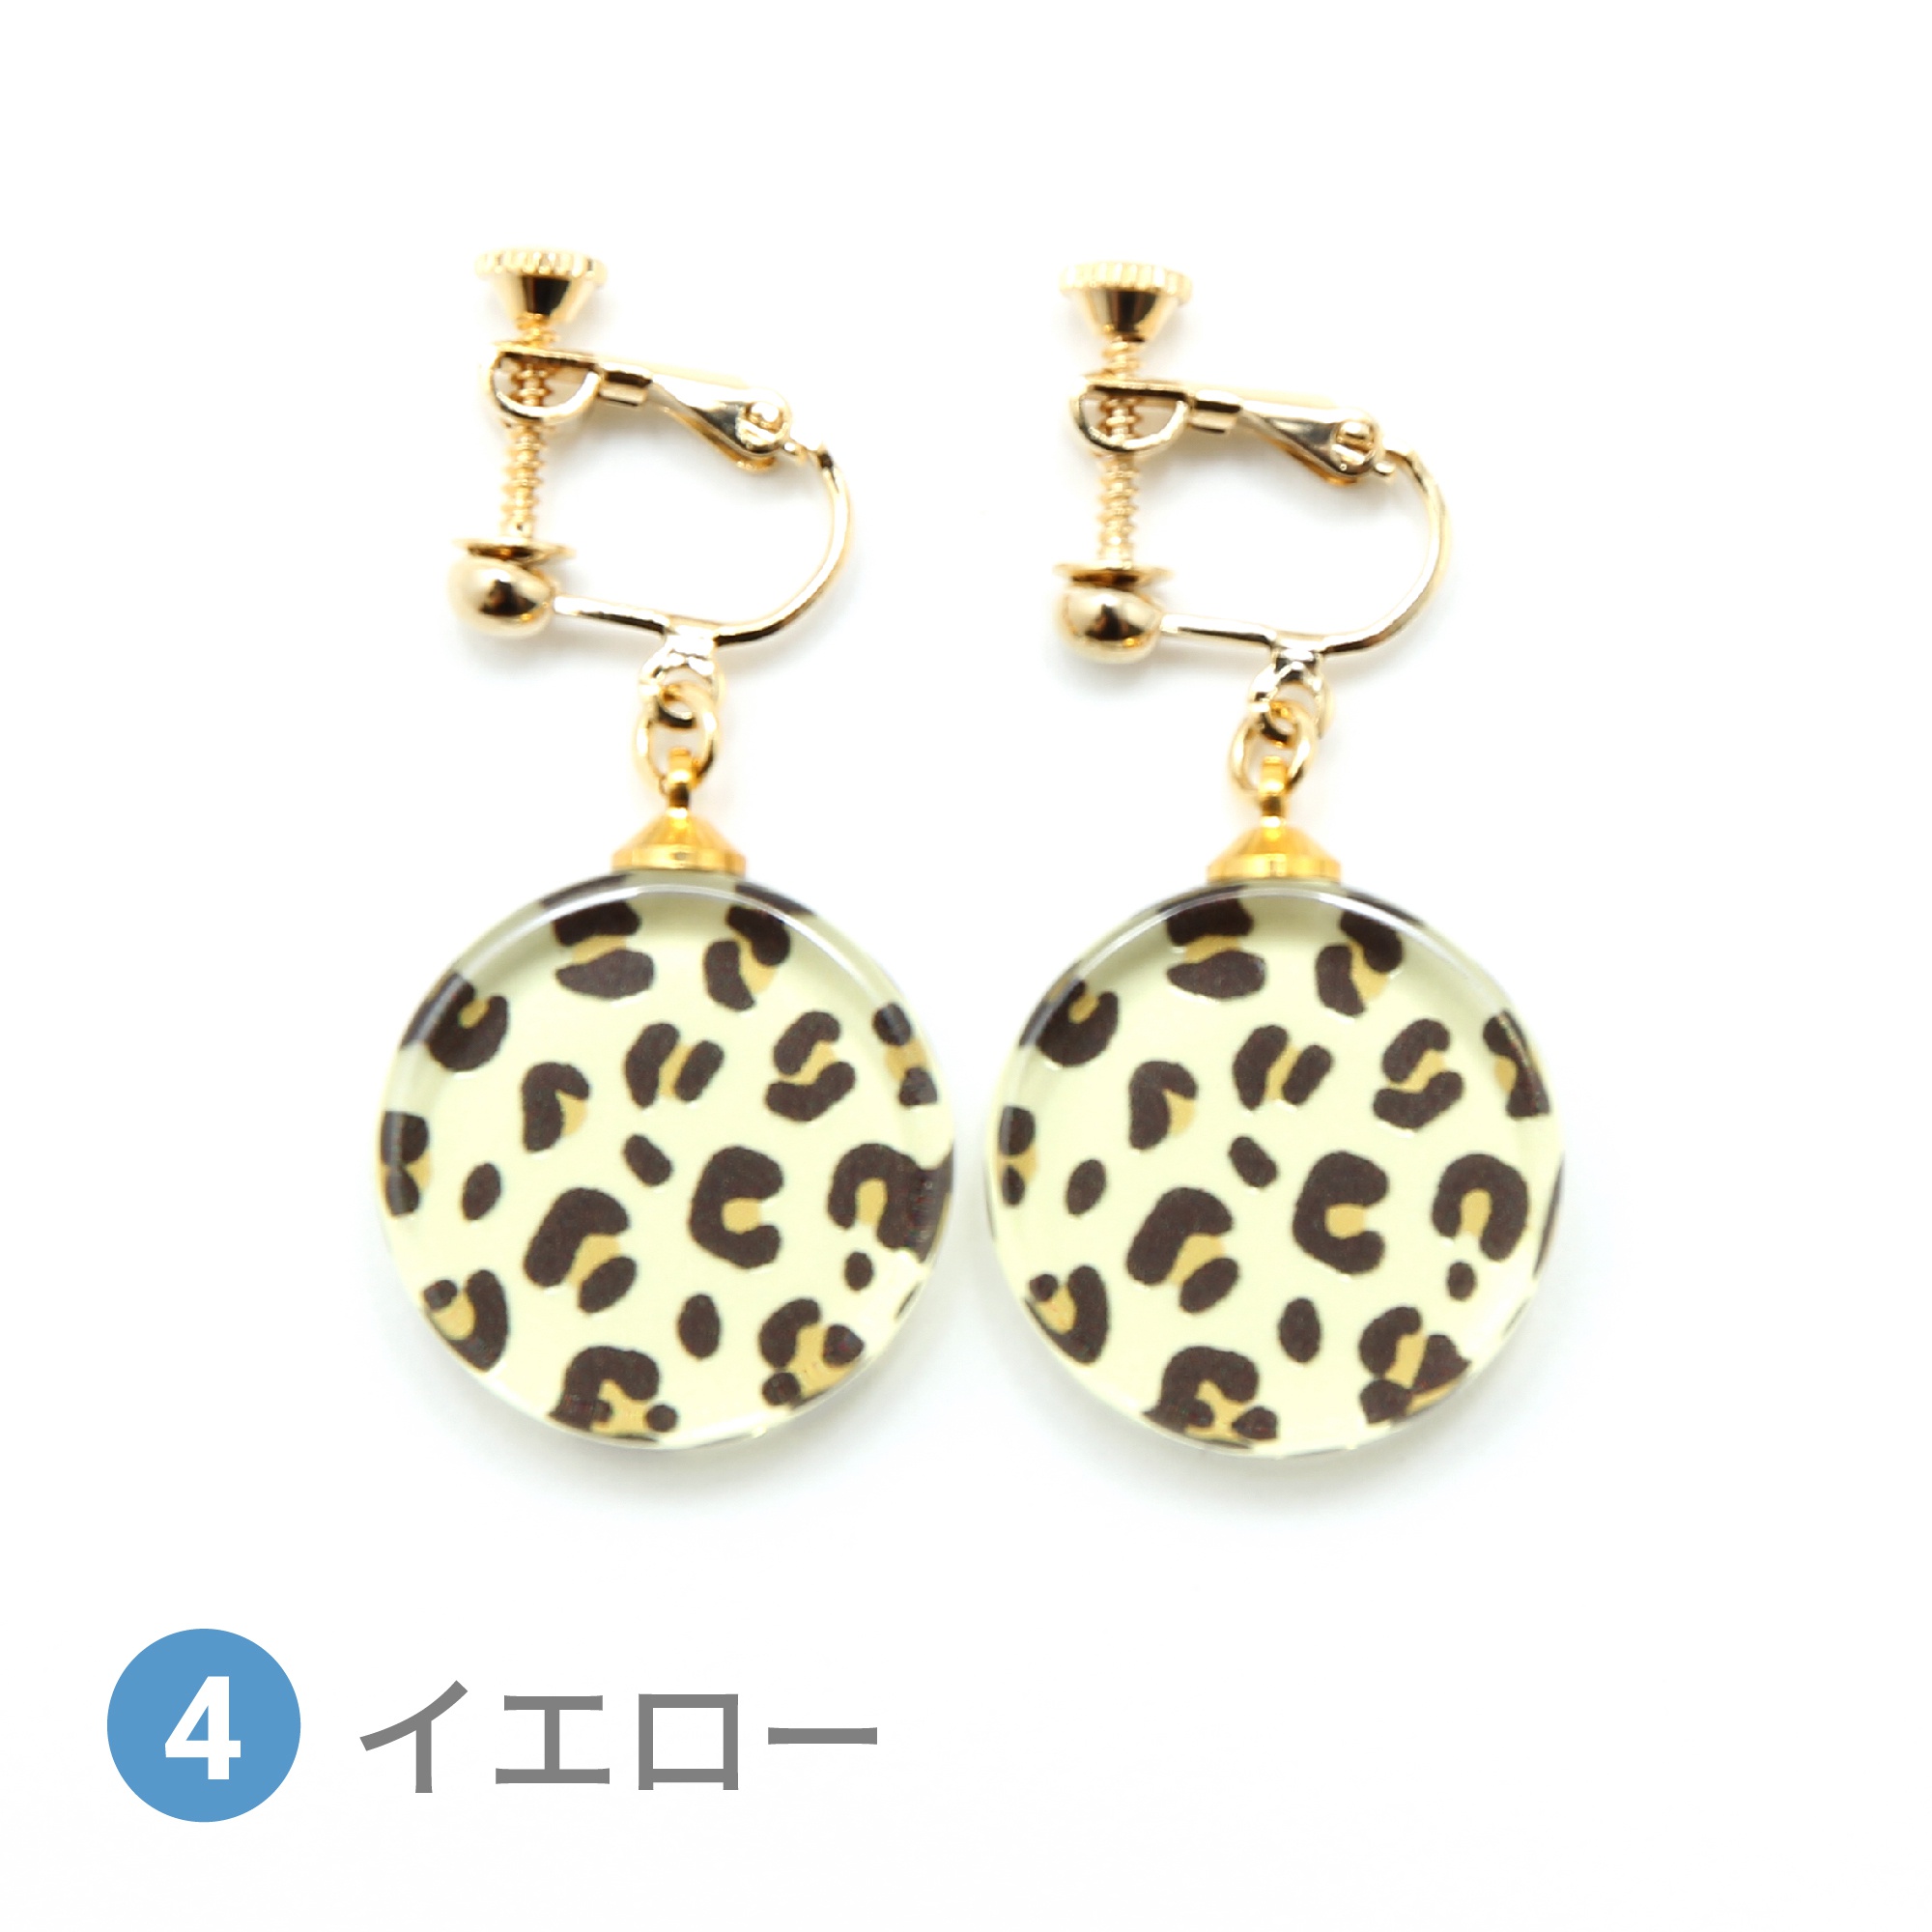 Glass accessories Earring LEOPARD yellow round shape